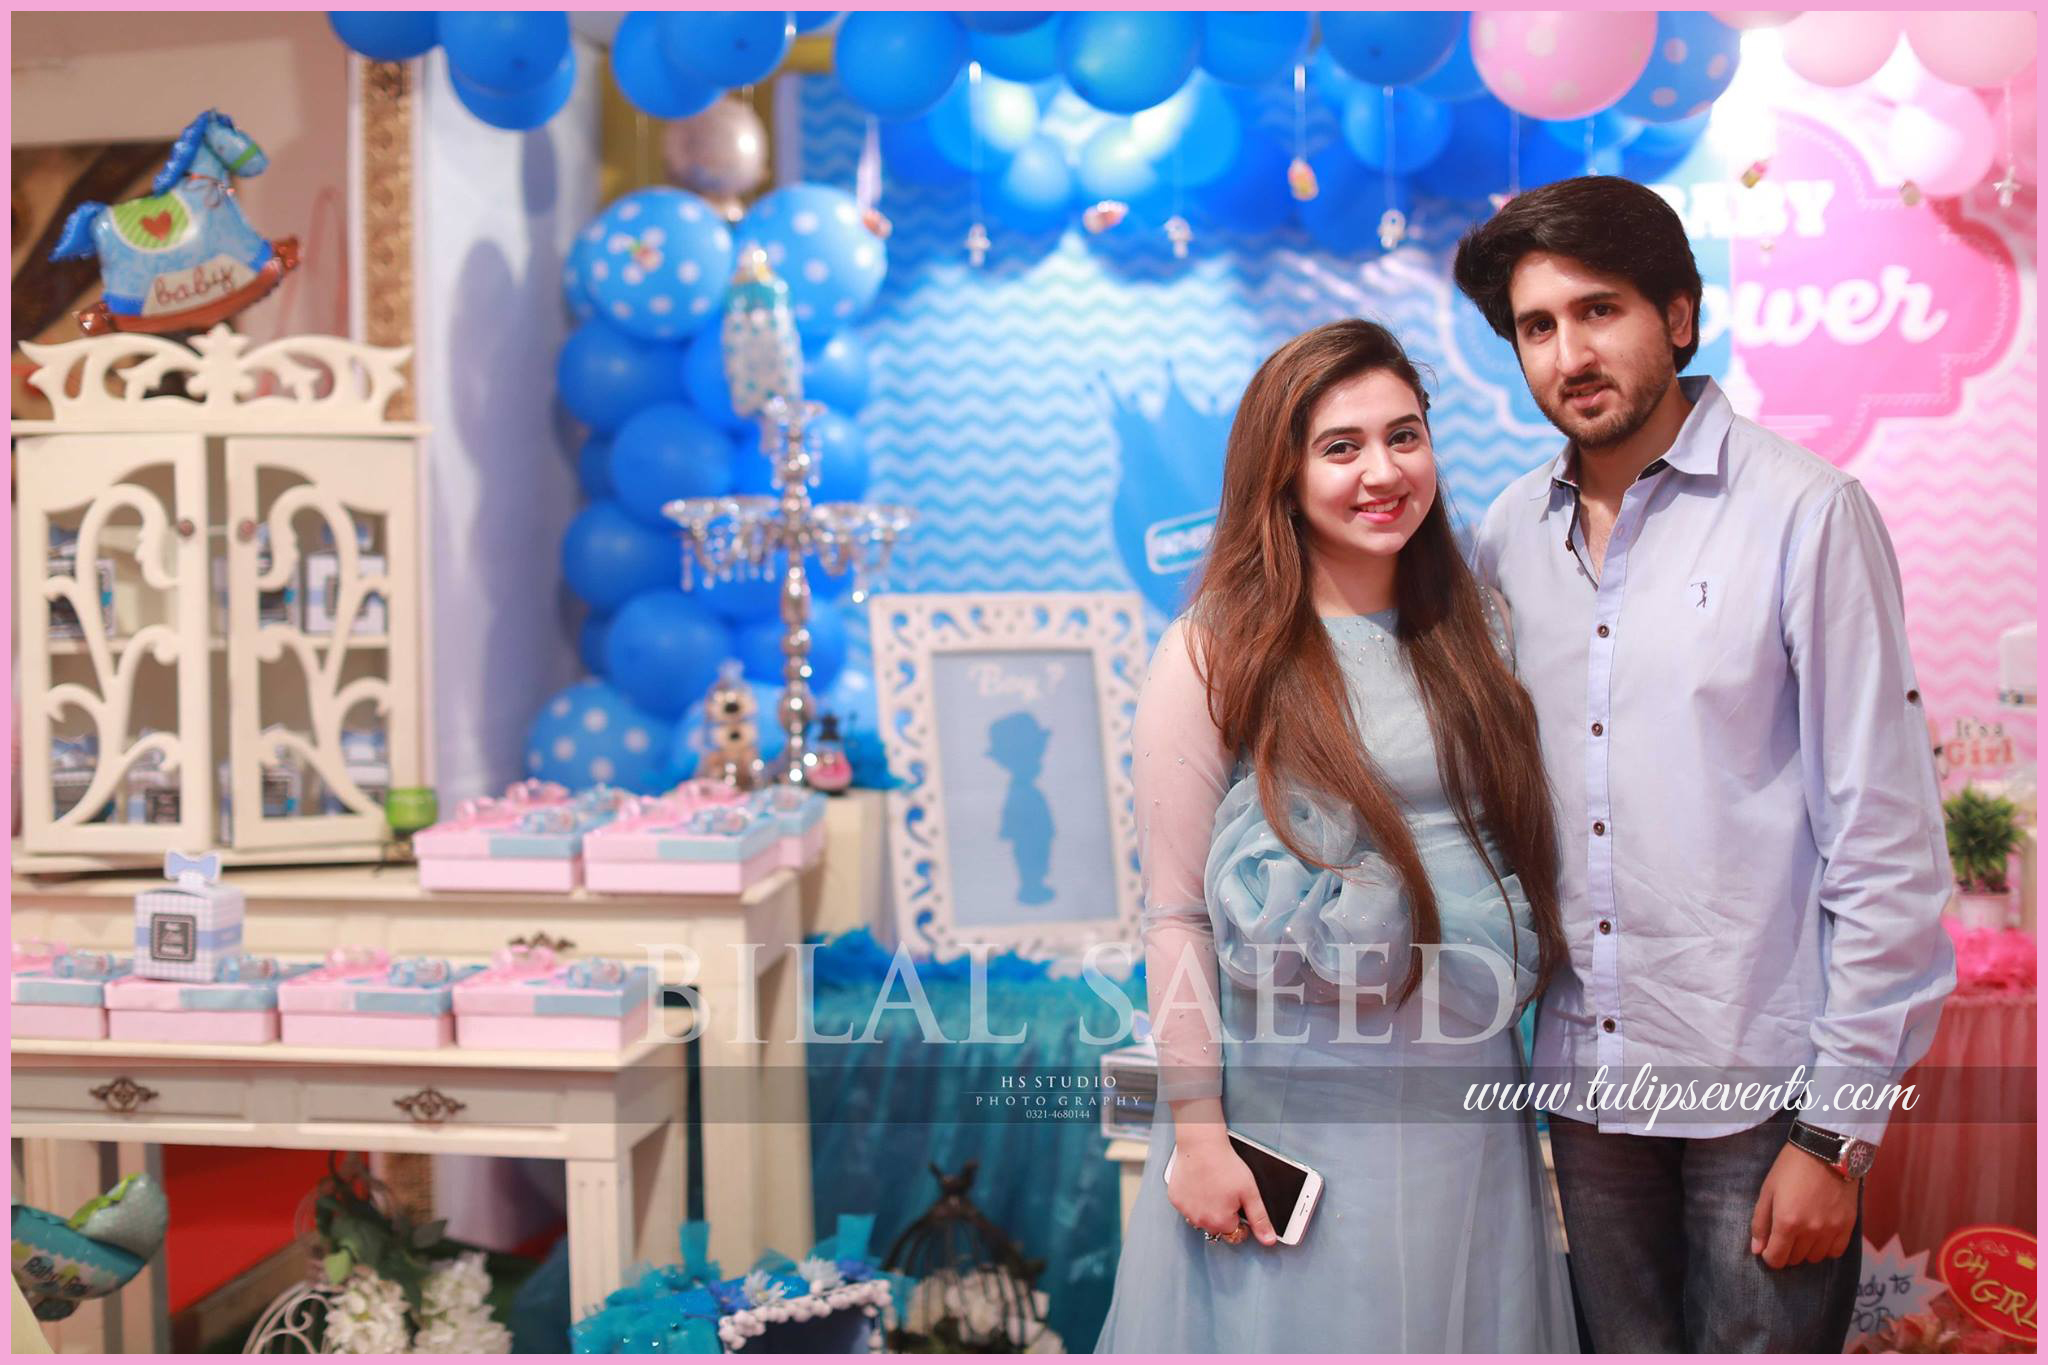 Baby Shower Party decoration ideas tulips events in Pakistan (1)